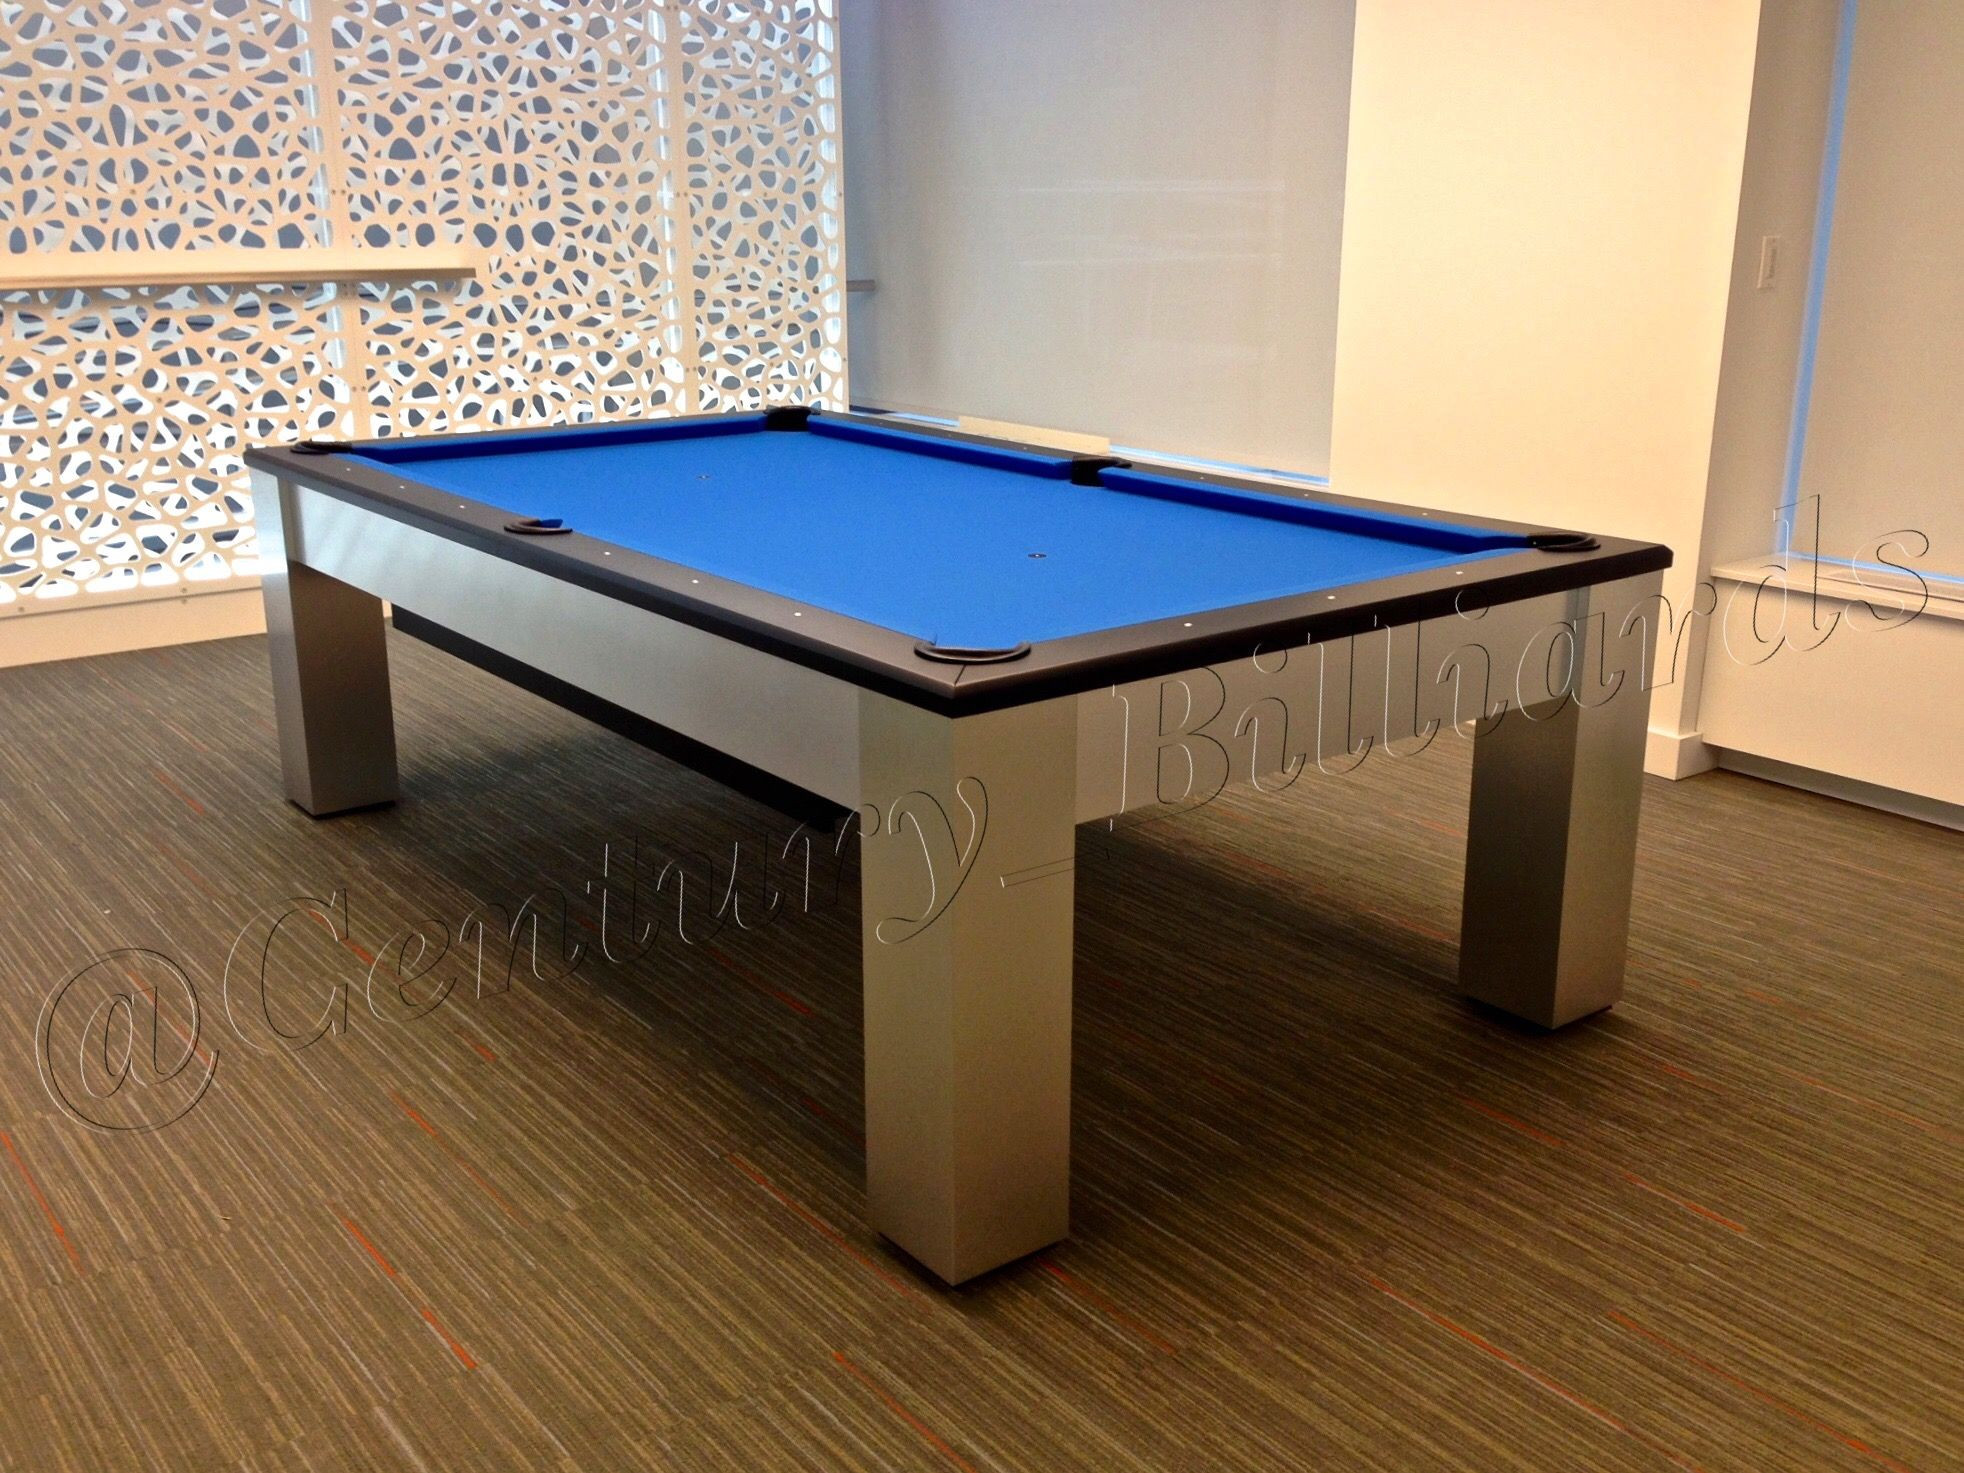 DIY Outdoor Pool Table
 Pin by Century Billiards on Modern Pool Tables in 2019